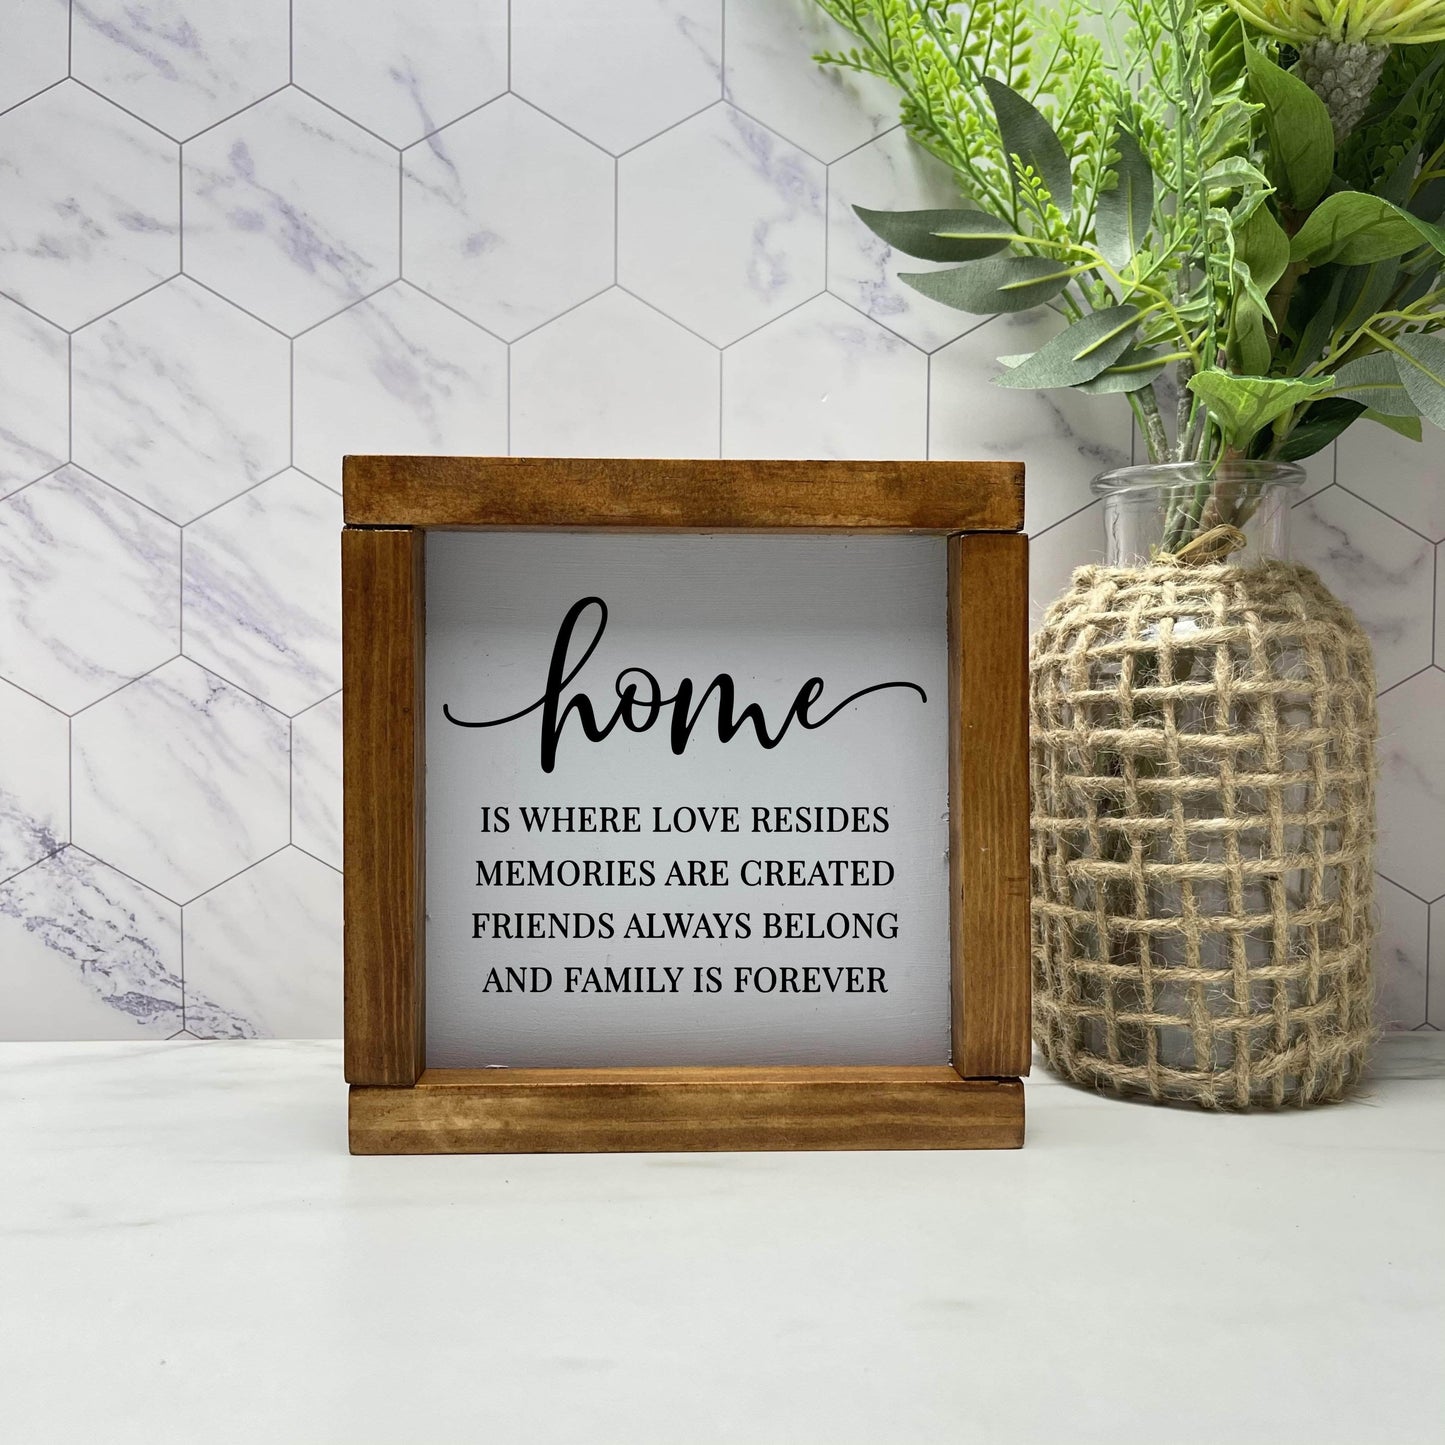 Home is where love is framed wood sign, farmhouse sign, rustic decor, home decor